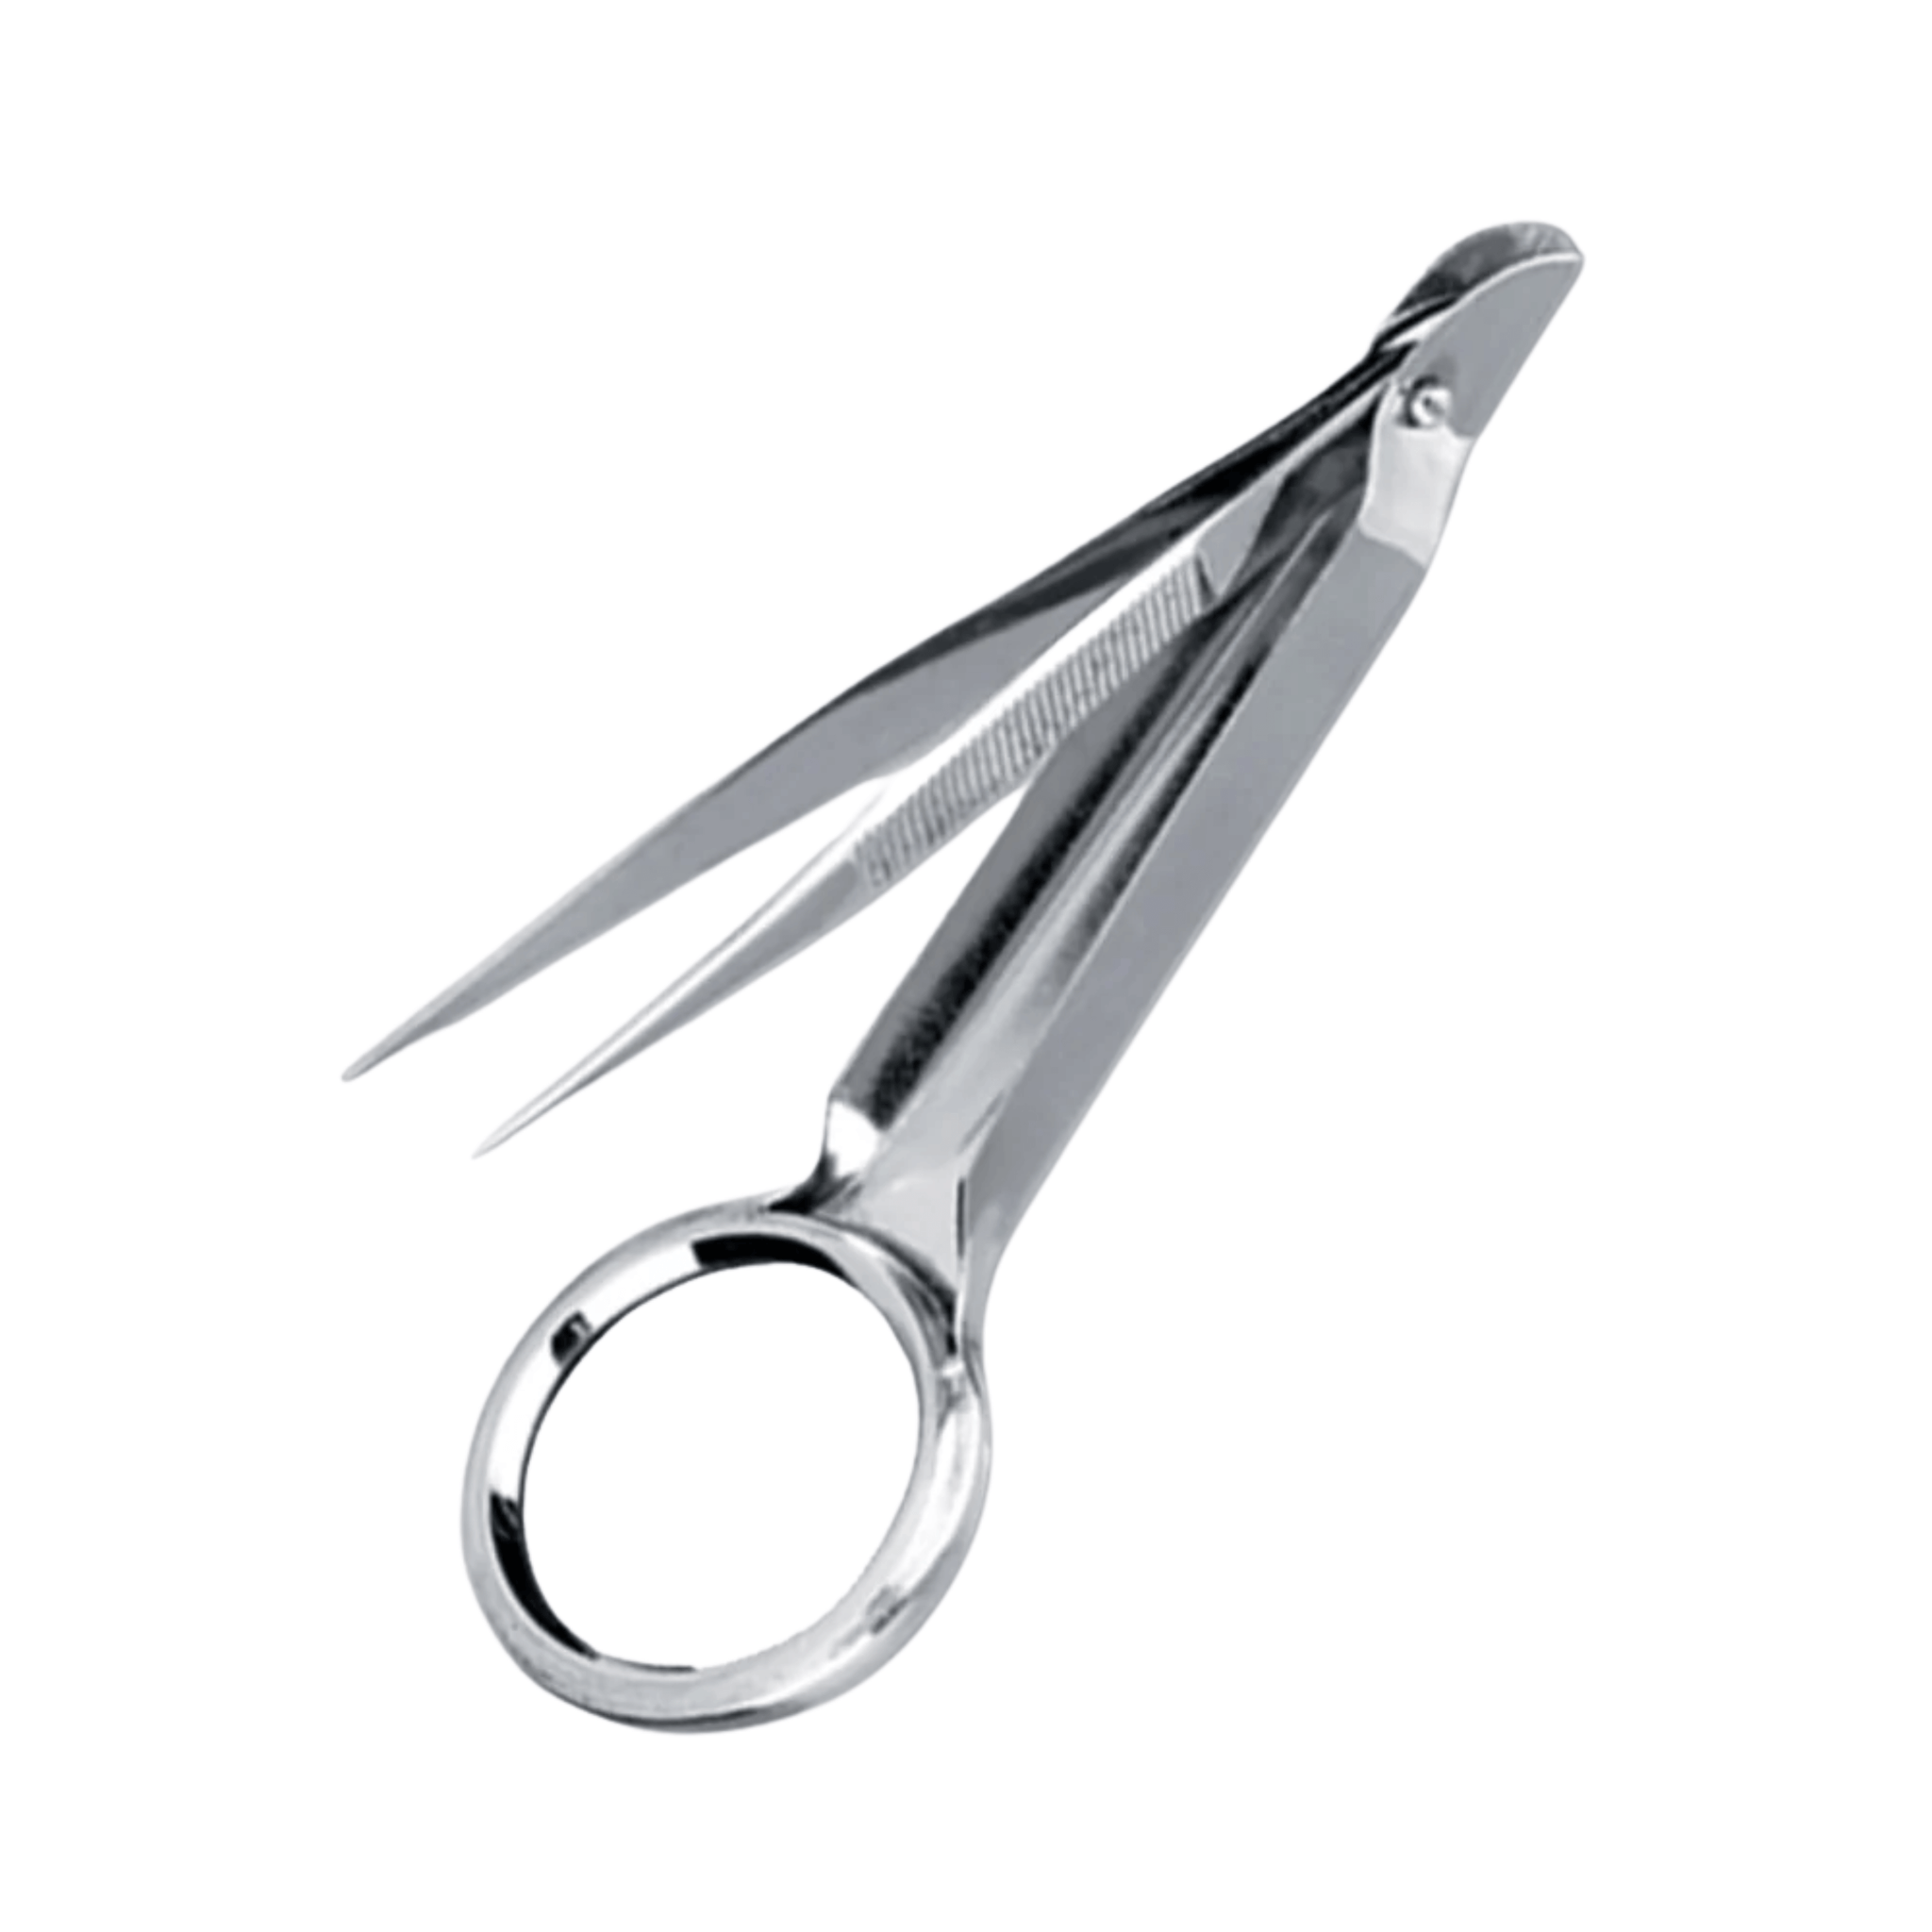 Basic Splinter Forceps with Magnifier